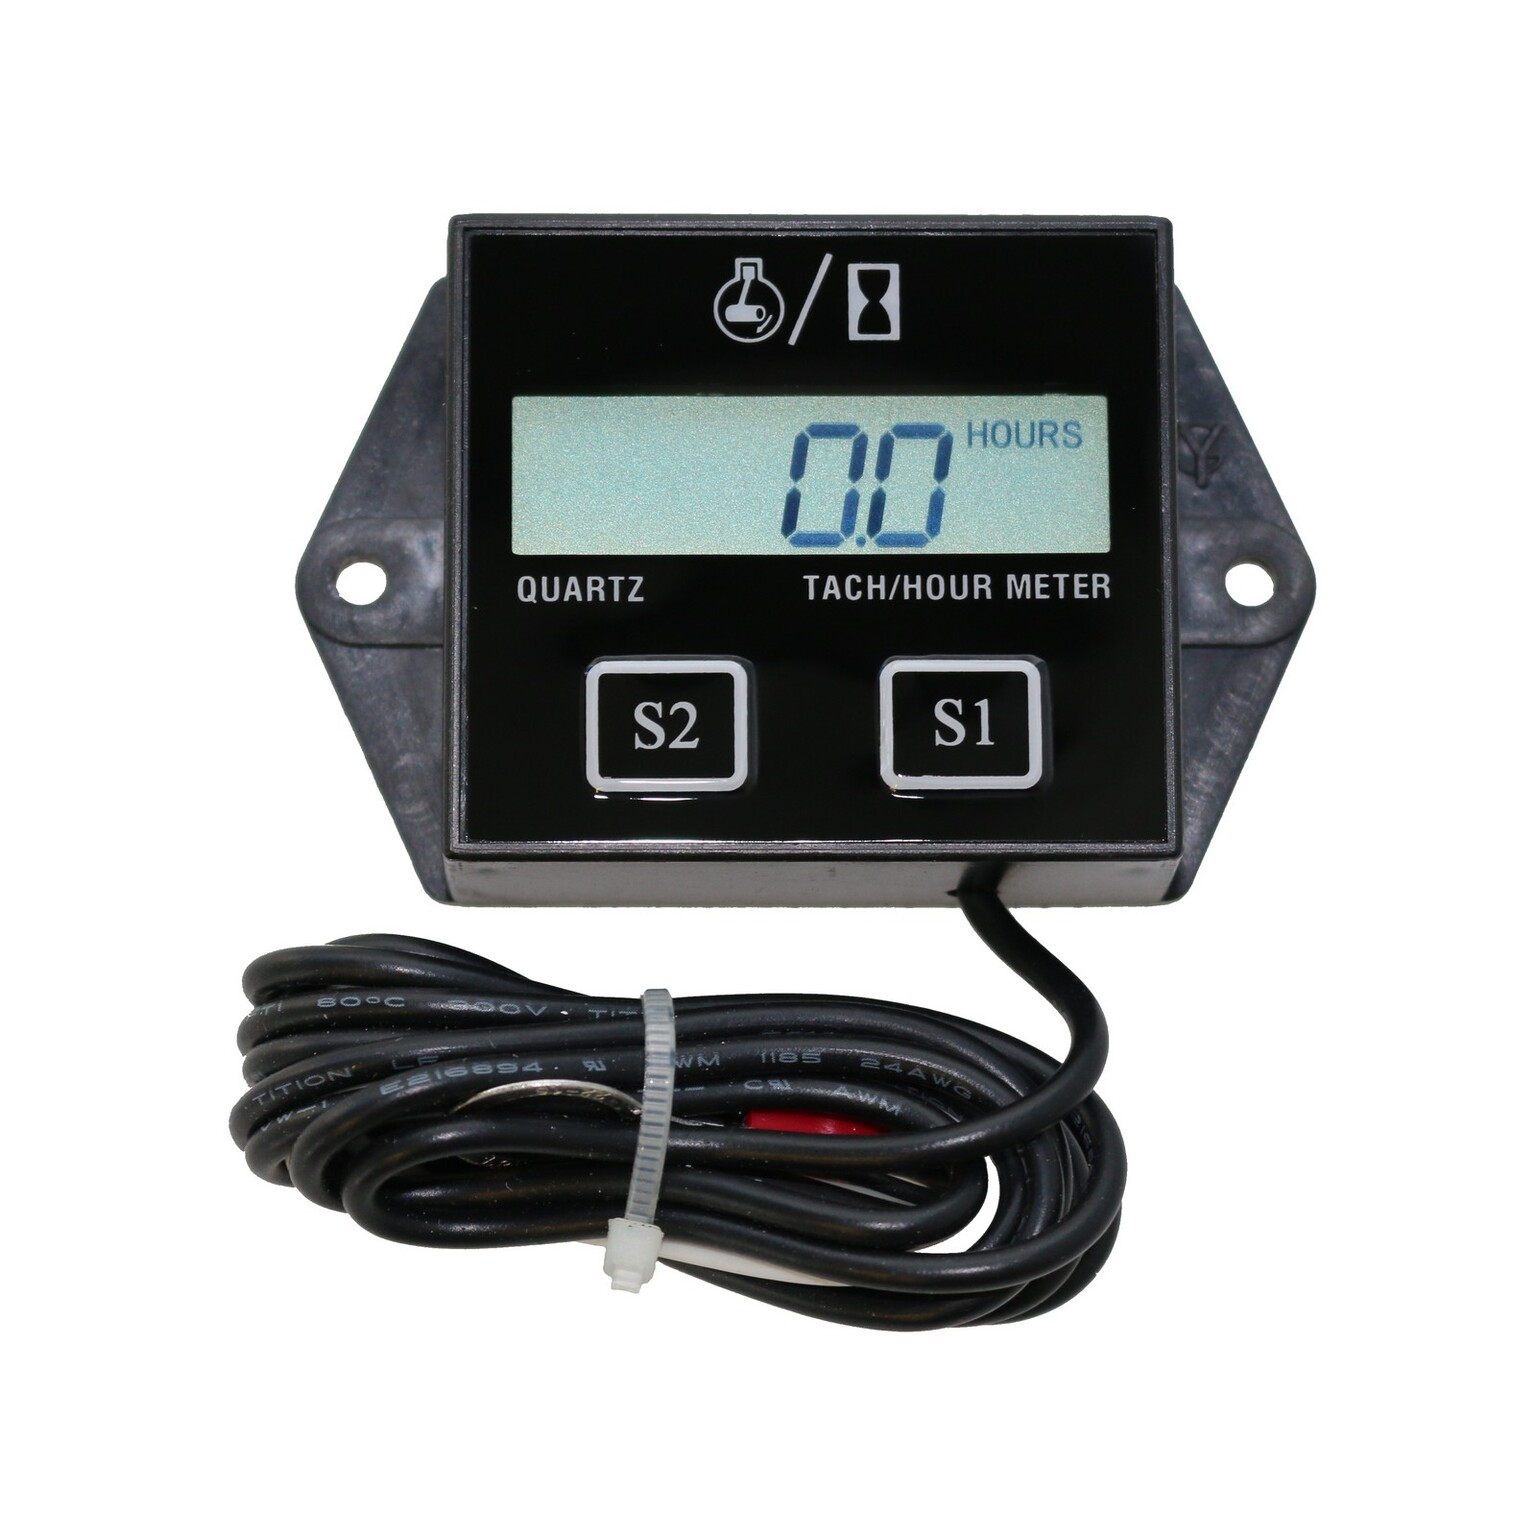 Digital Hour Meter Tachometer for 2 and 4 Stroke Engines

 